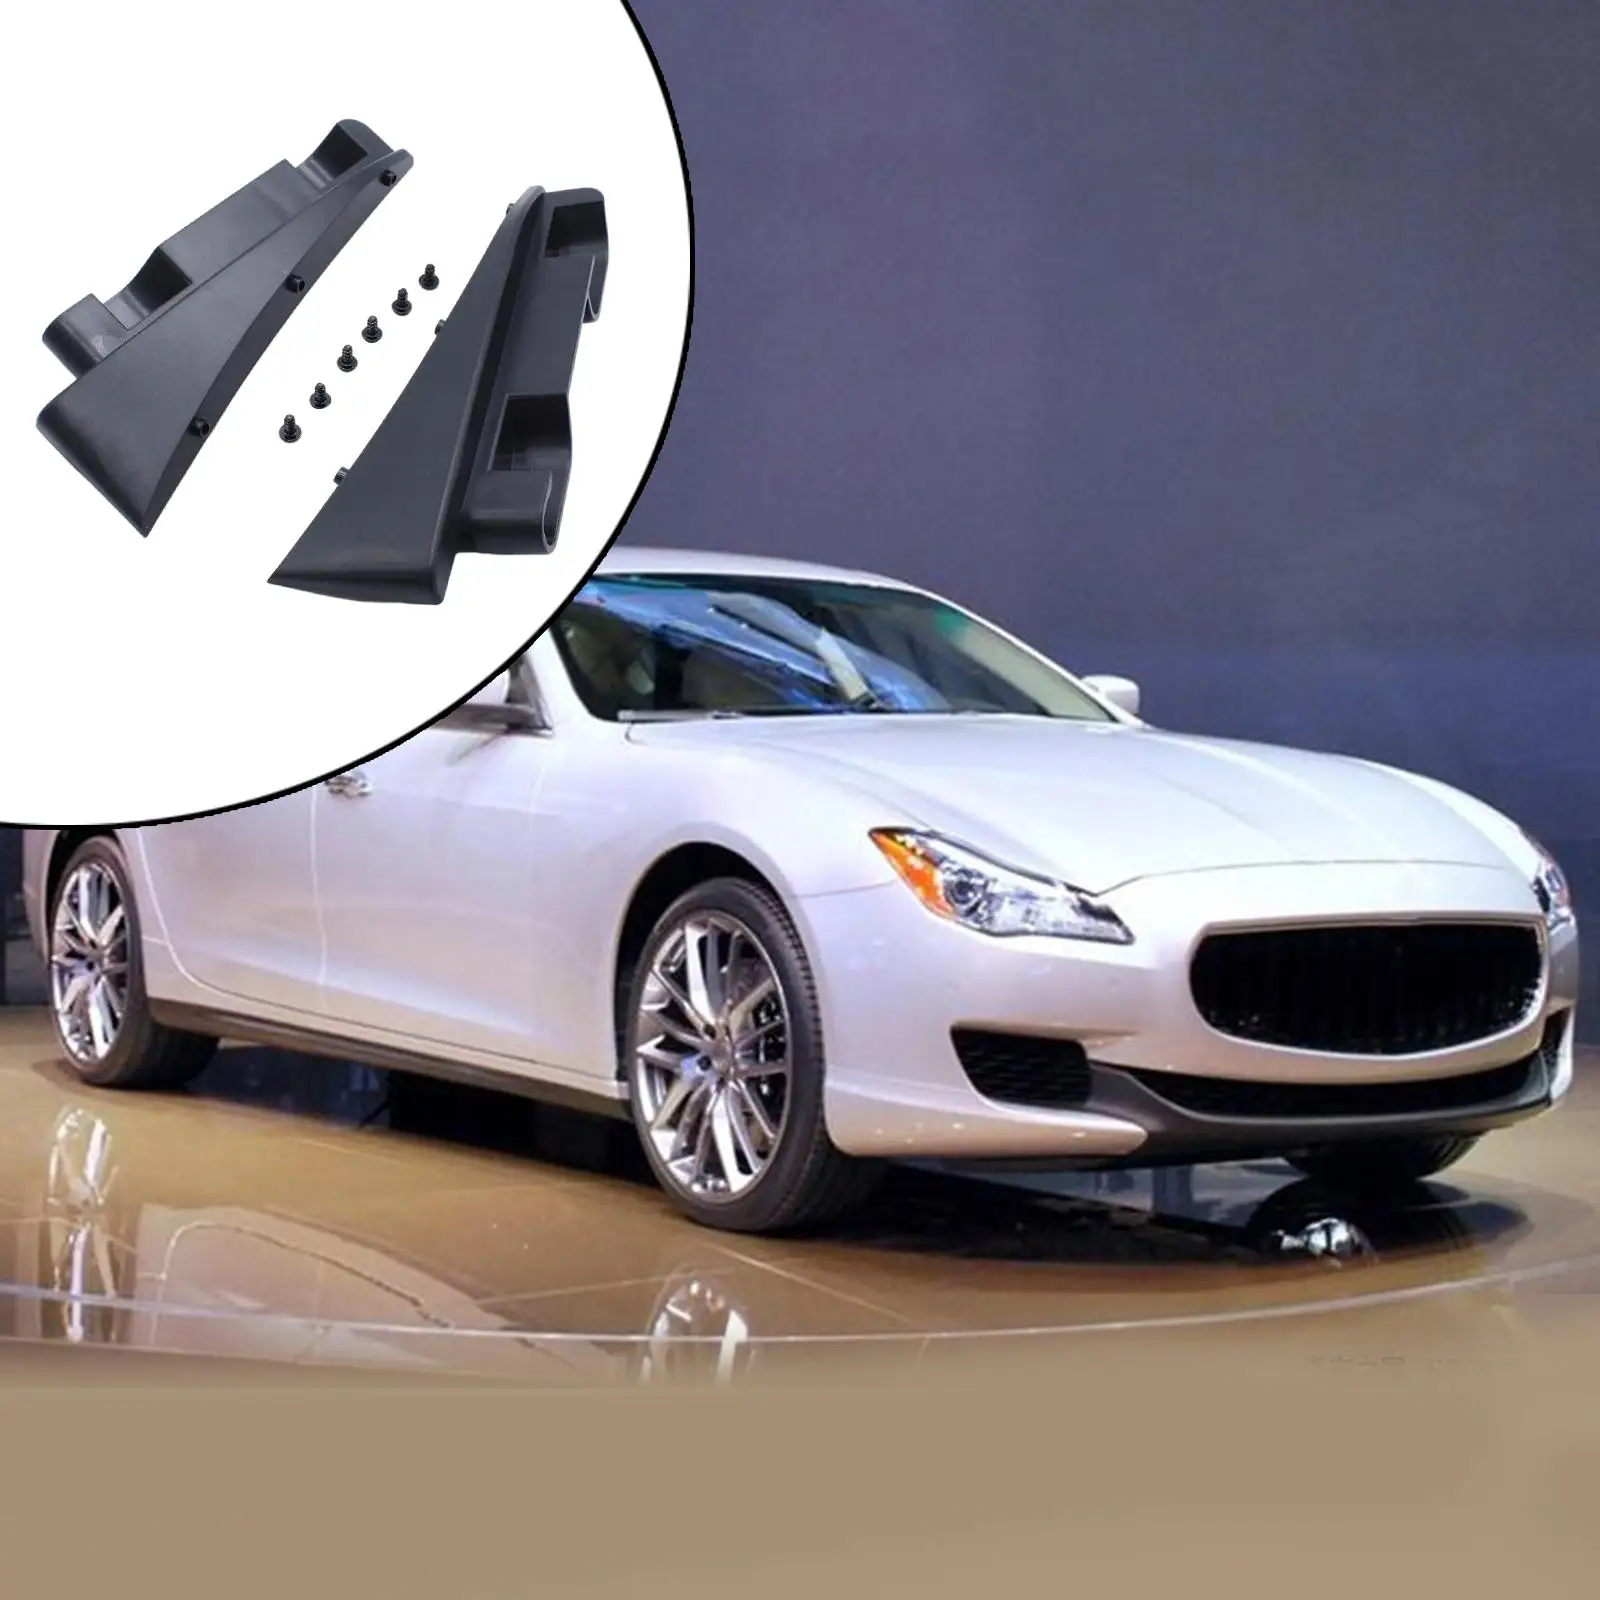 2 Pieces Trunk Luggage Cover C-Pillar Side Bracket 8J8898283 Bbm 106012-0001 106012-0001 Fit for Audi TT Coupe 2006-2014 8J